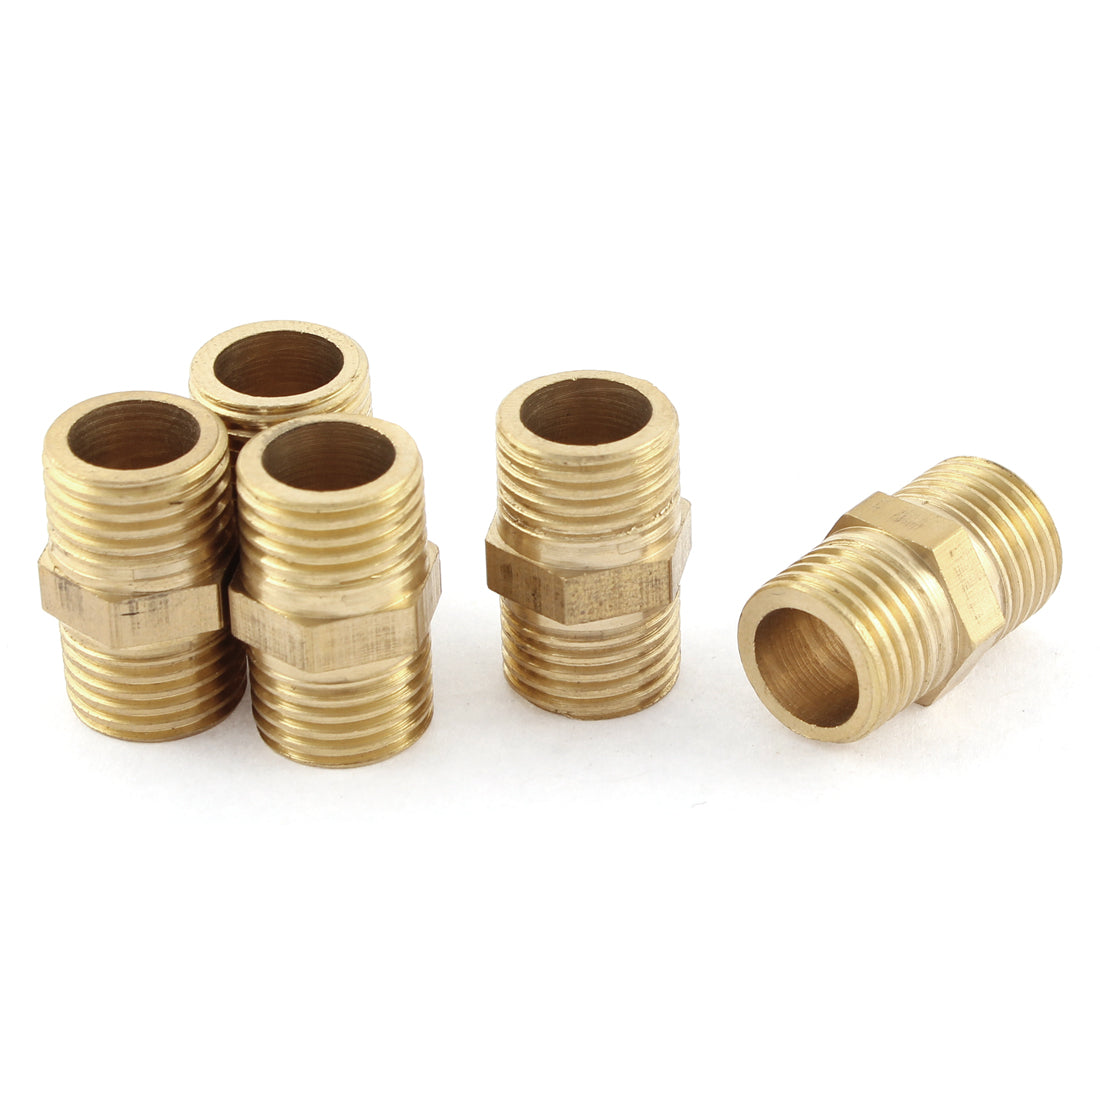 uxcell Uxcell 5 Pcs 1/4 BSP to 1/4 BSP Male Thread Brass Pipe Hex Nipple Fitting Quick Adapter